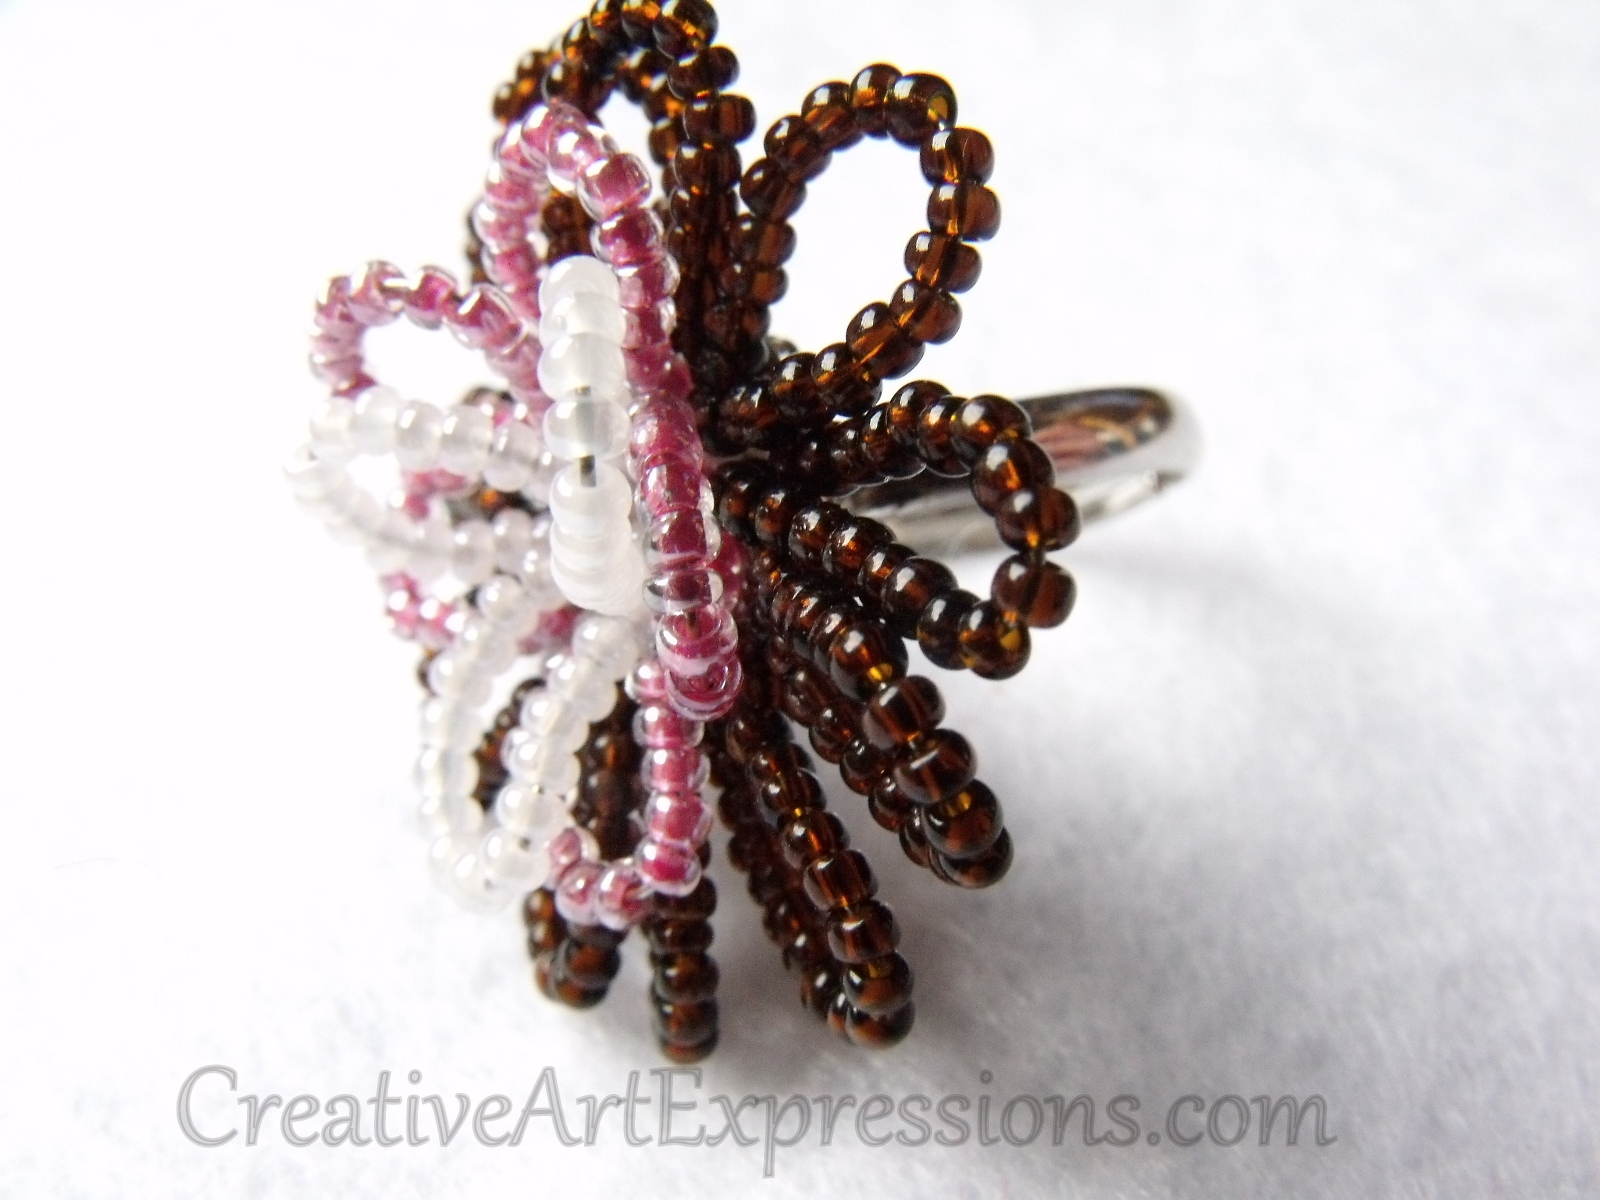 Creative Art Expressions Handmade Seed Bead Wire Wrapped Flower